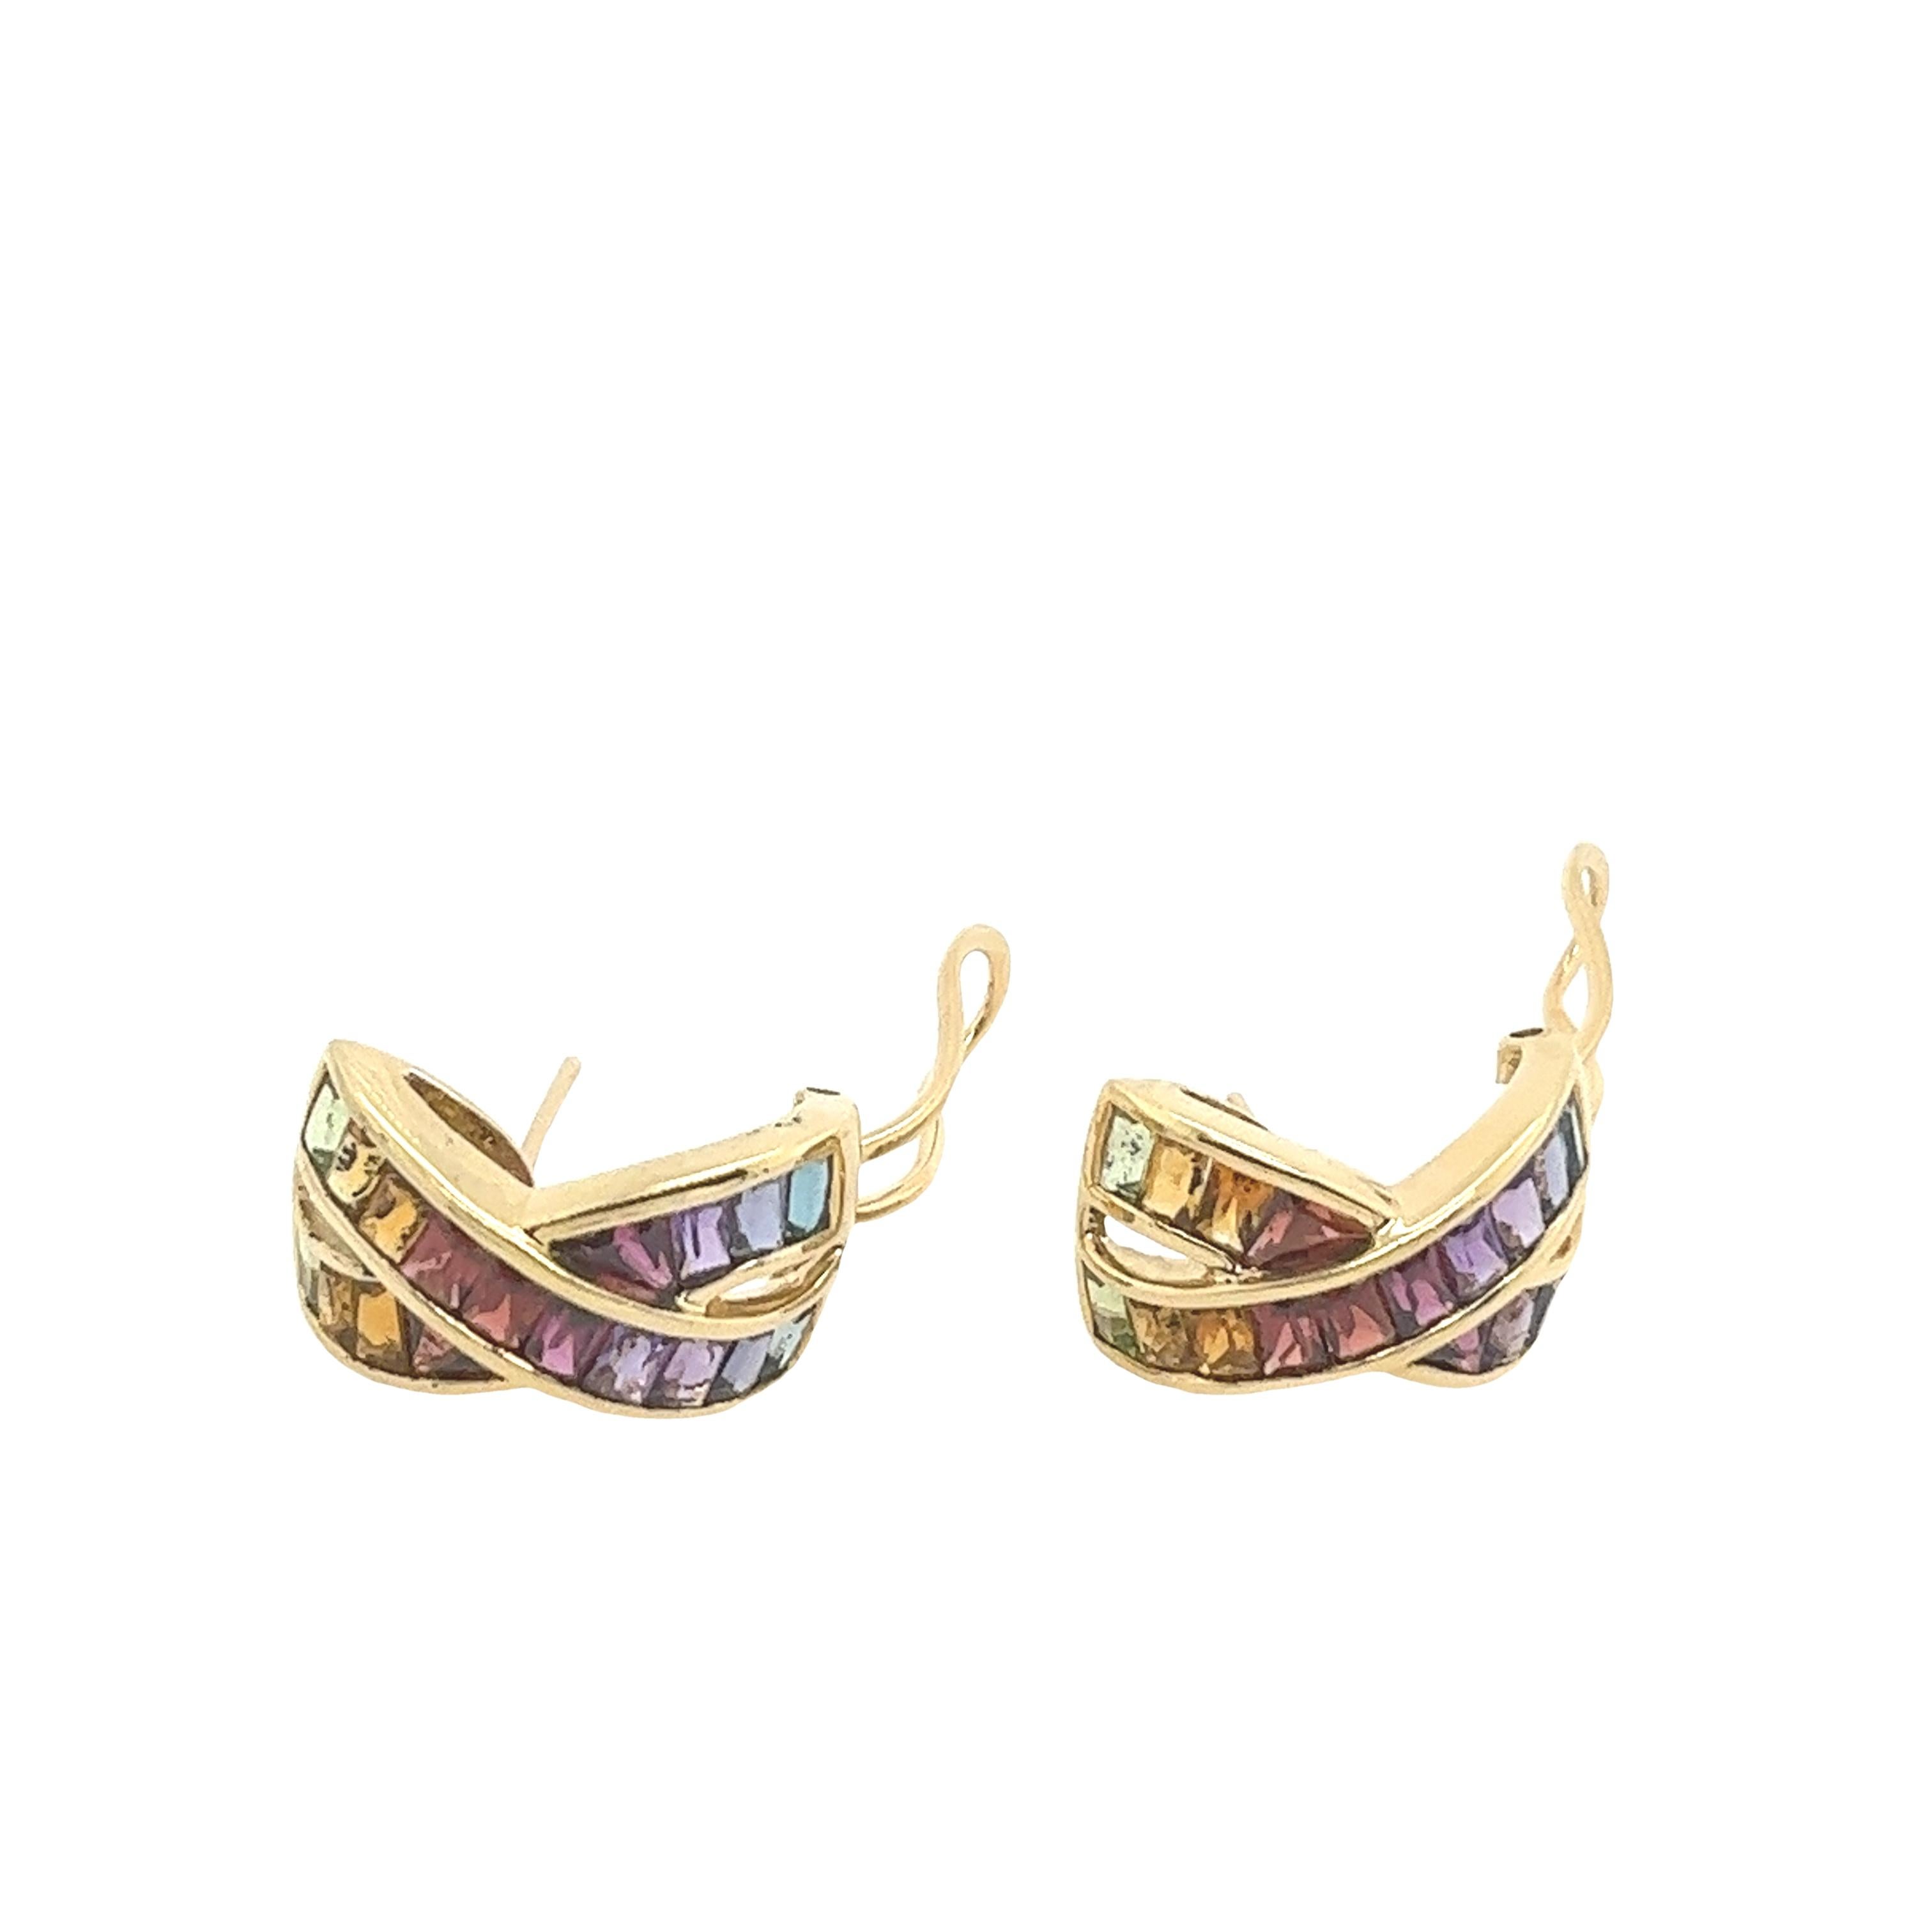 This pair of H. Stern earrings 
features 36 multicolored natural sapphires
set in 18ct yellow gold in clip setting. 
It's perfect for every day and can be worn with any outfit.
Total  Weight: 10.7g
Earring Dimension: 21.20mm x 12mm
Peg & clip